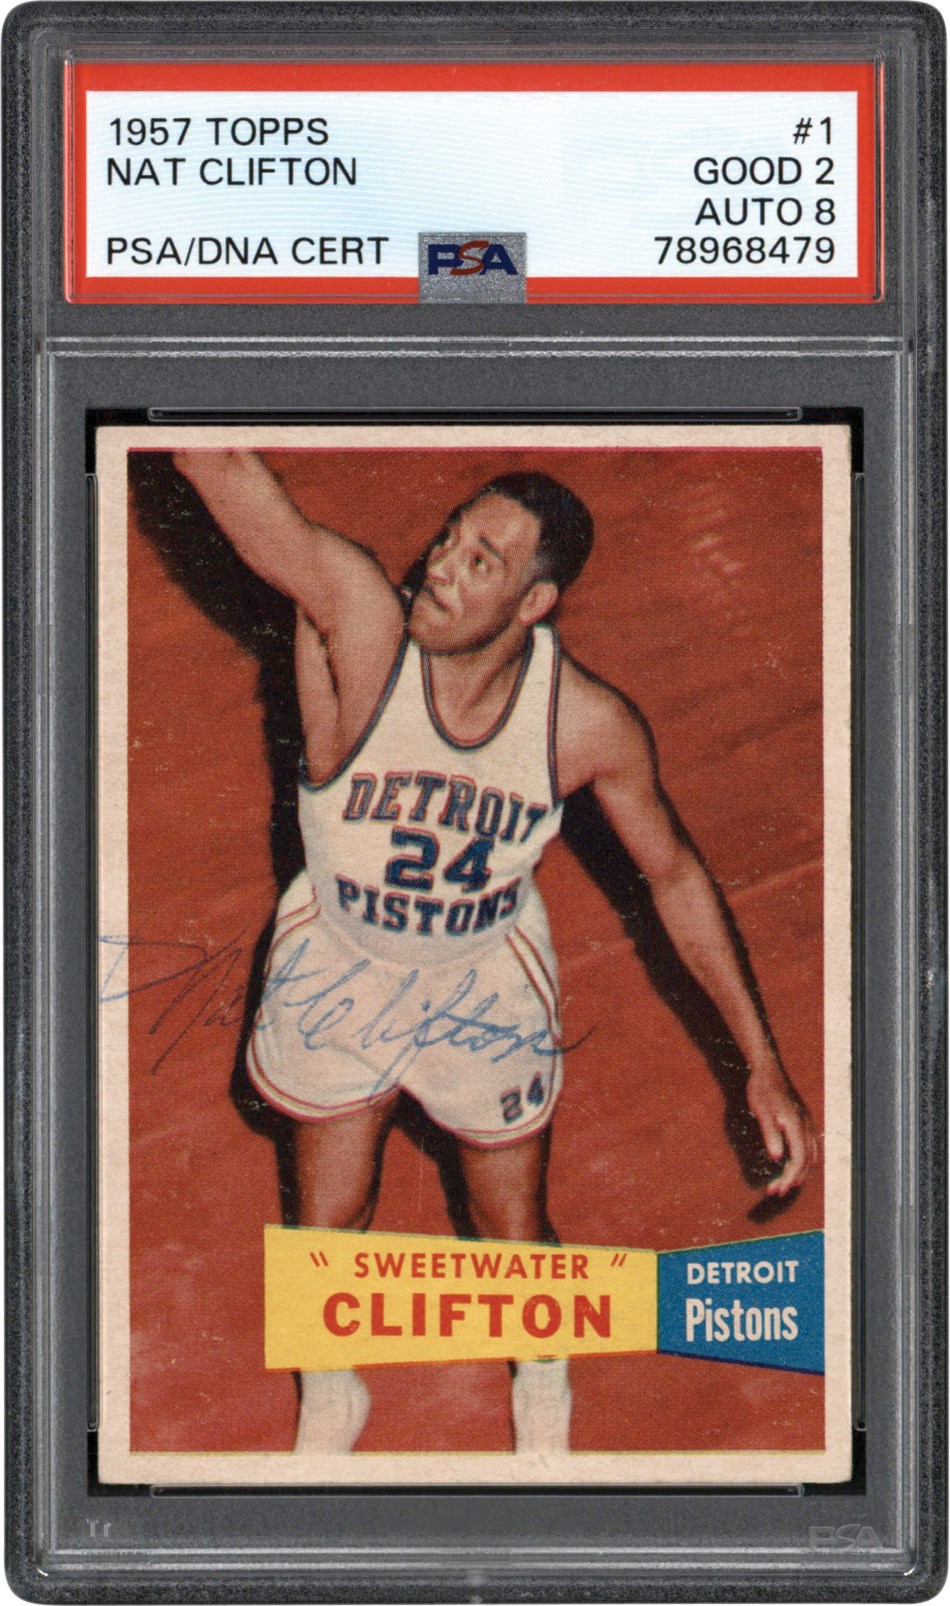 Basketball Cards - 1957 Topps Basketball #1 Nat "Sweetwater" Clifton Signed Card PSA GD 2 Auto 8 (Only Dual-Graded PSA Example)